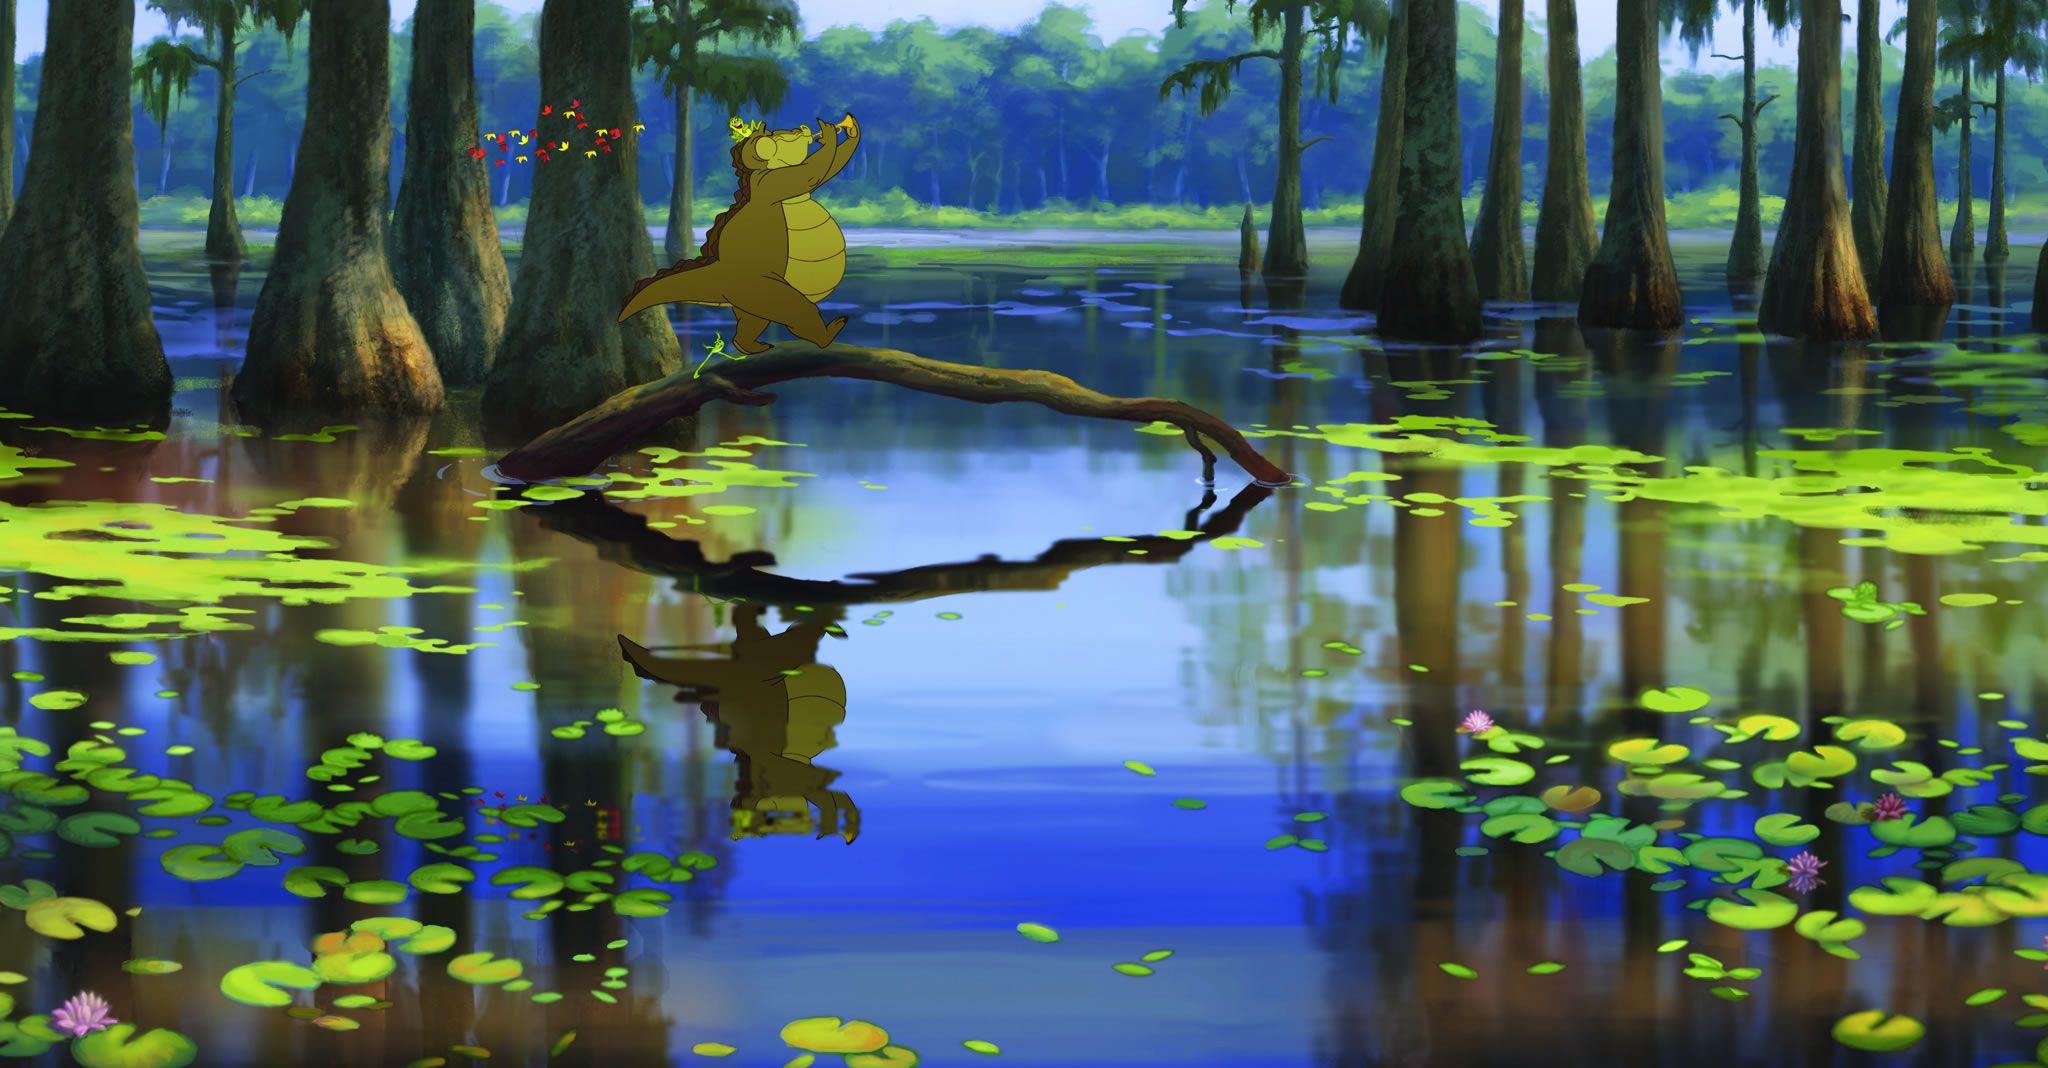 Louis the Gator in the Bayou from Princess and the Frog Desktop